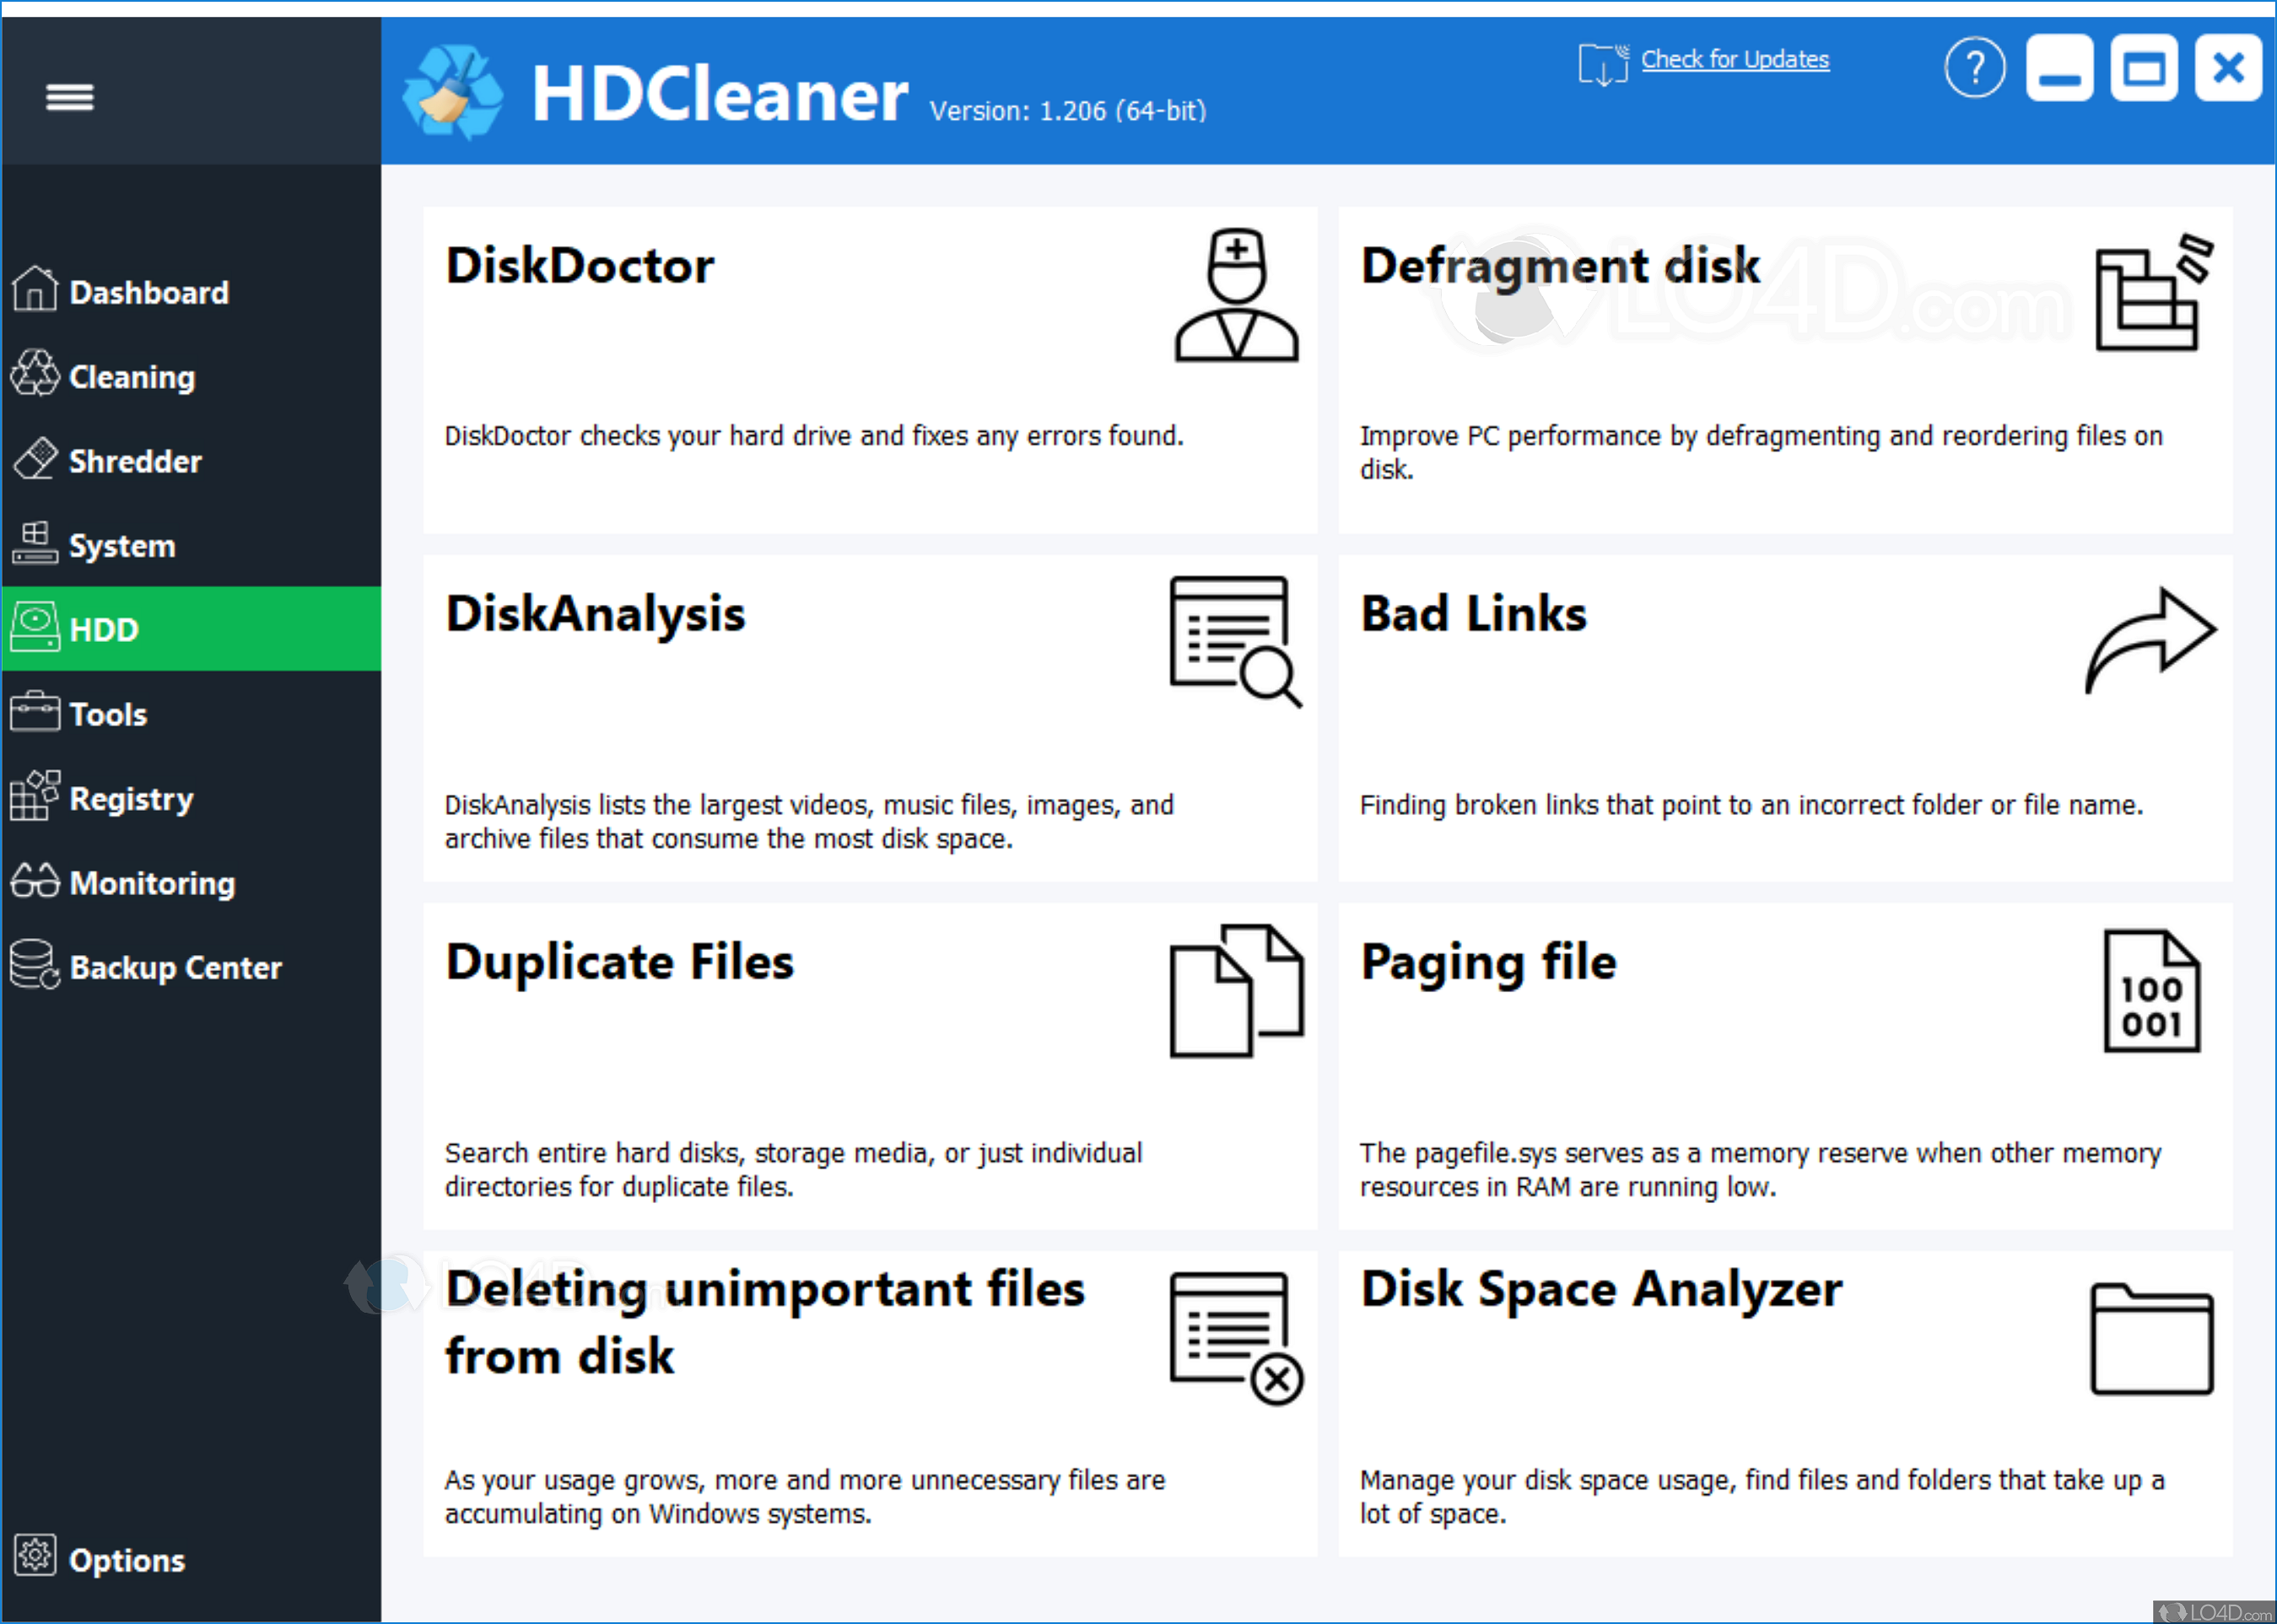 download the new version for ios HDCleaner 2.054